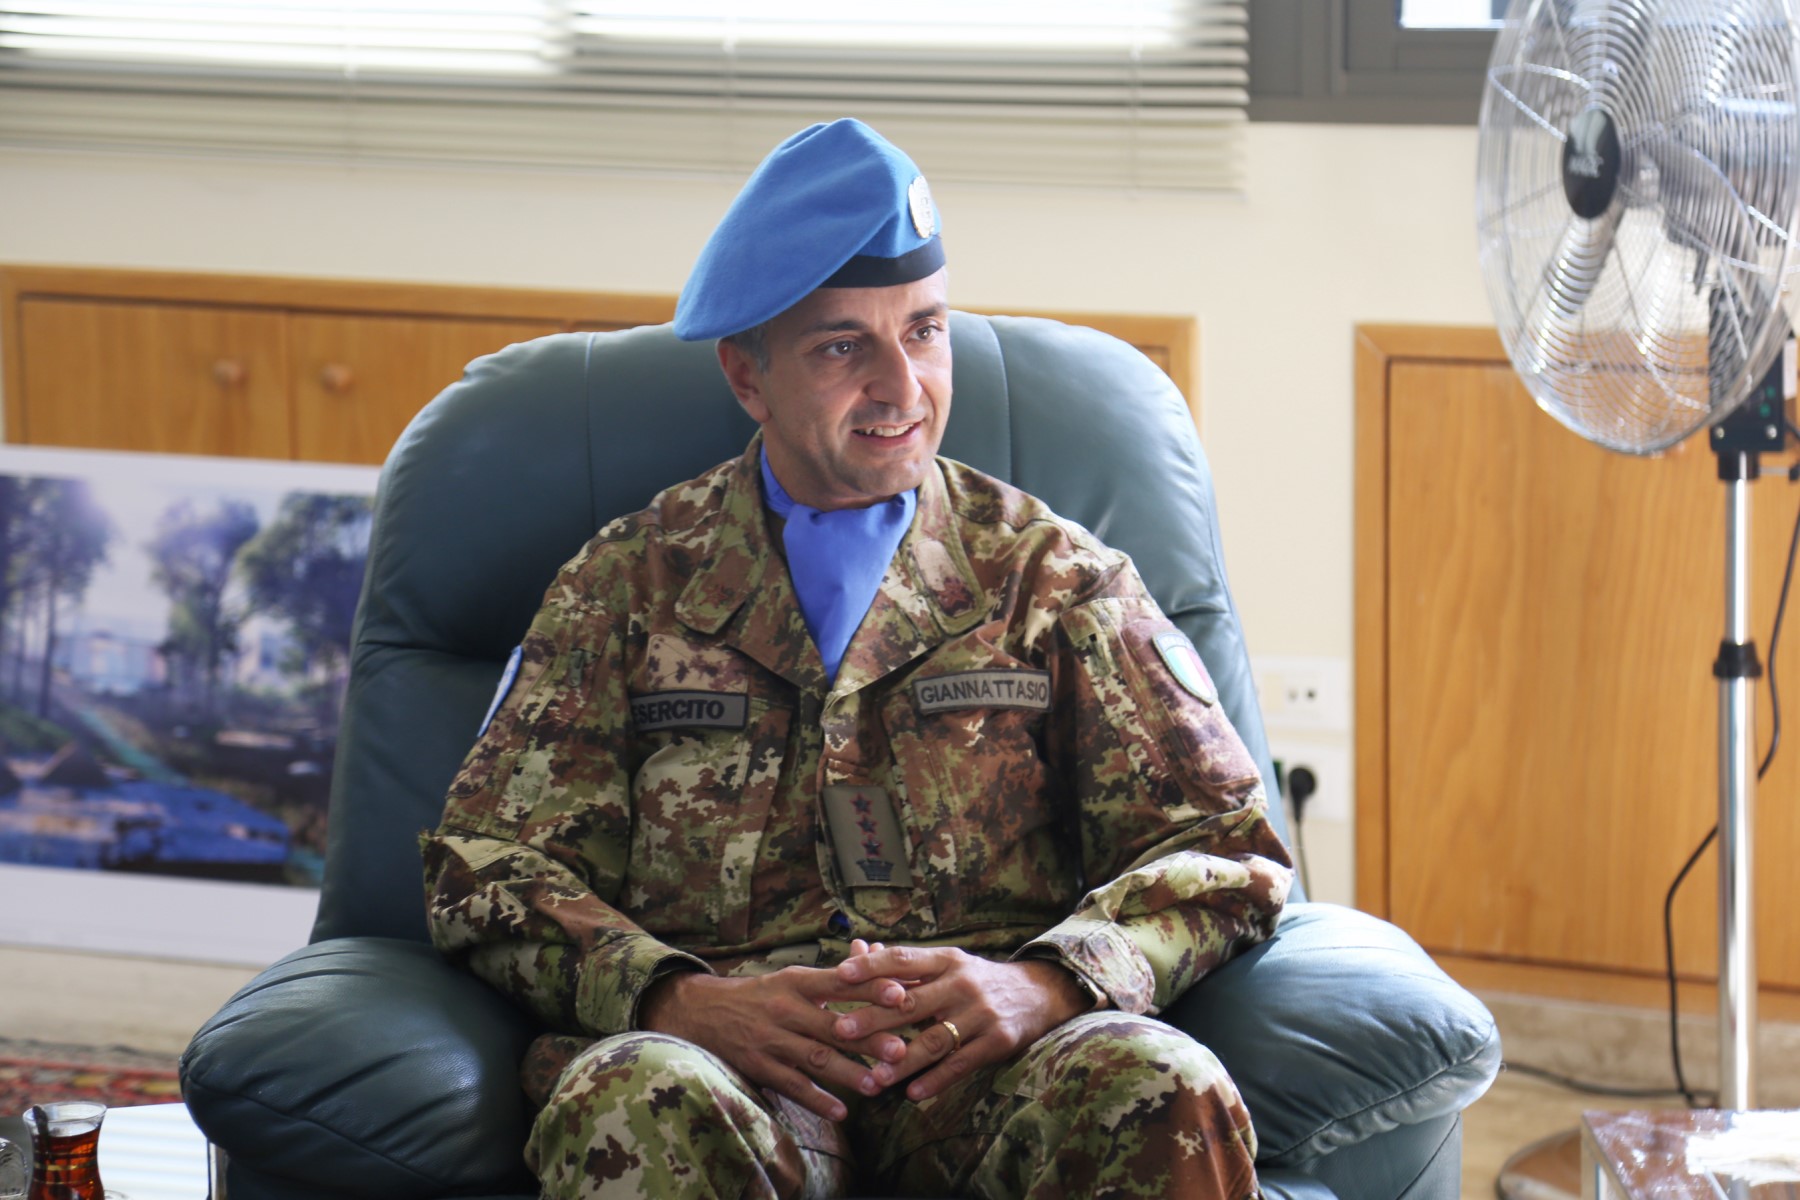 The Commander of the Italian Contingent Operating under UNIFIL, Col. Gianatazio, Visits the Cultural Compound